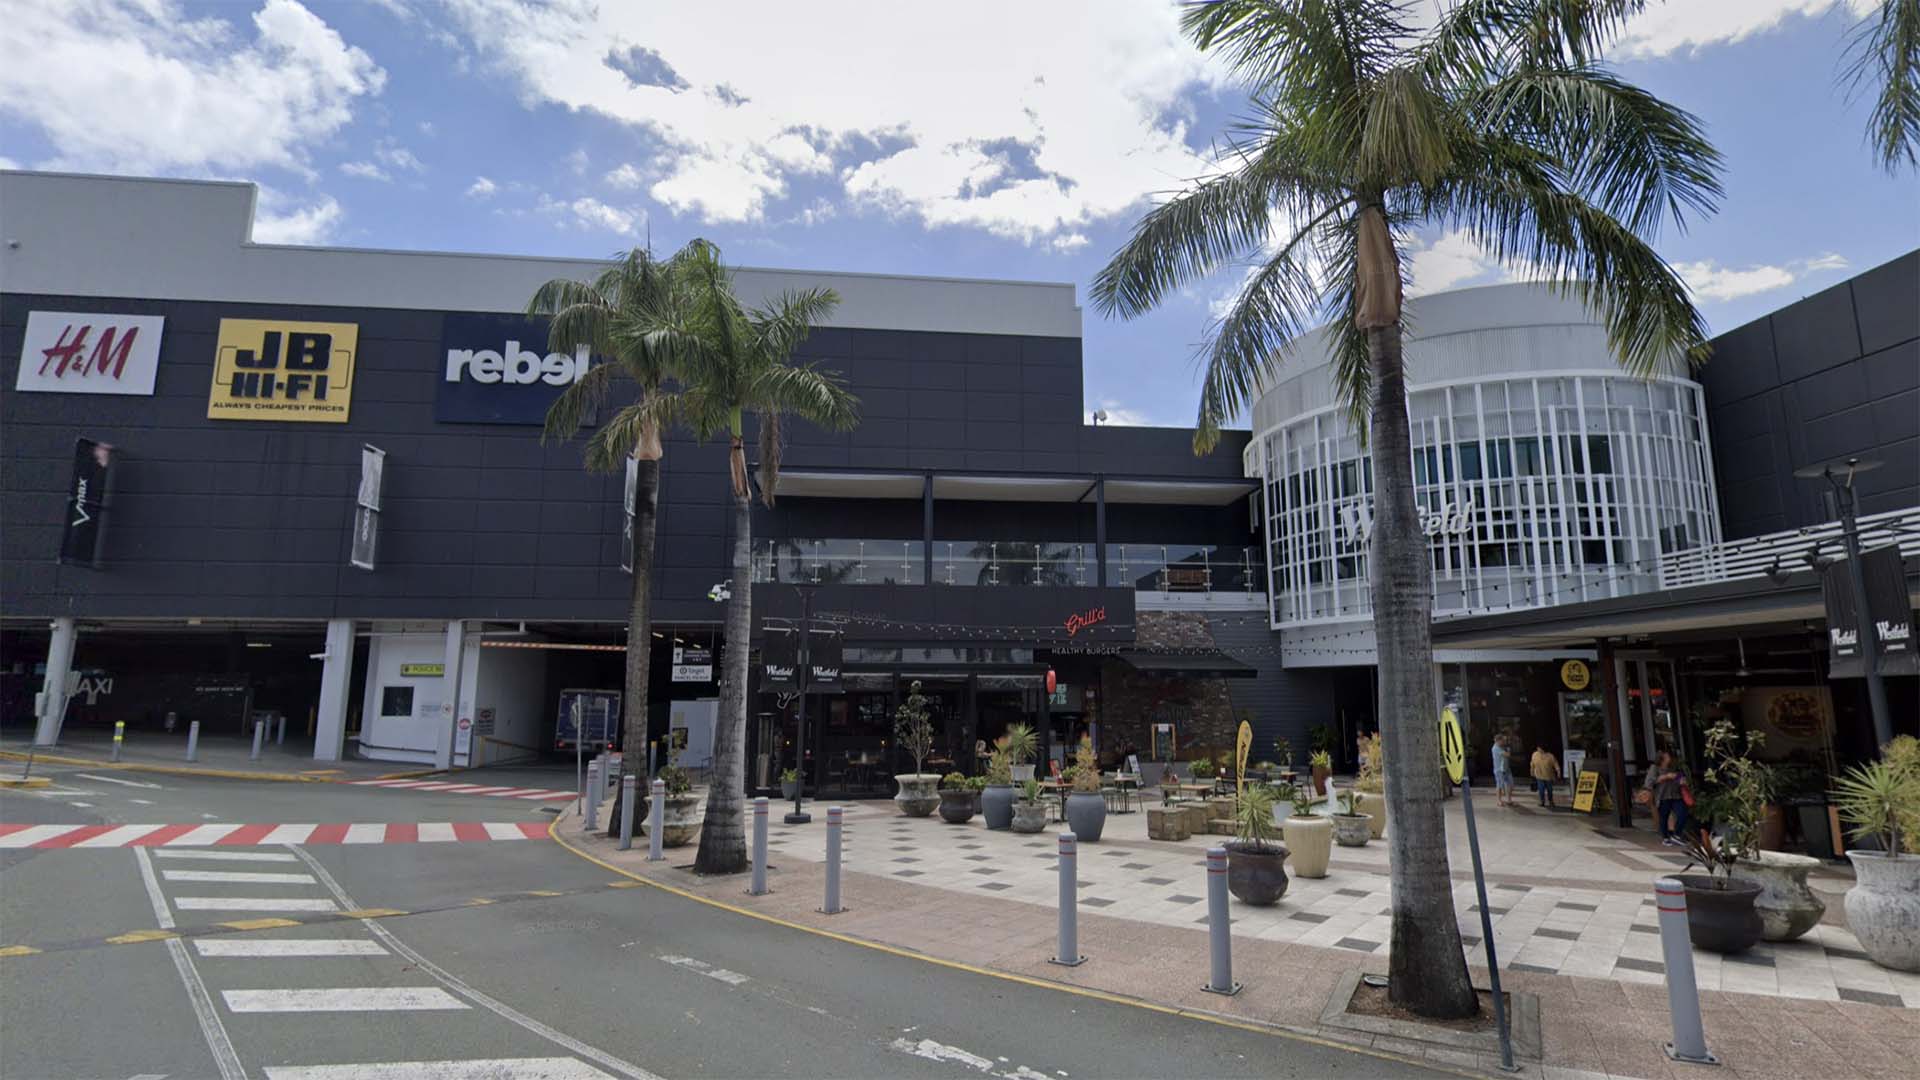 Chermside and Indooroopilly Shopping Centres Have Been Named As Exposure Sites